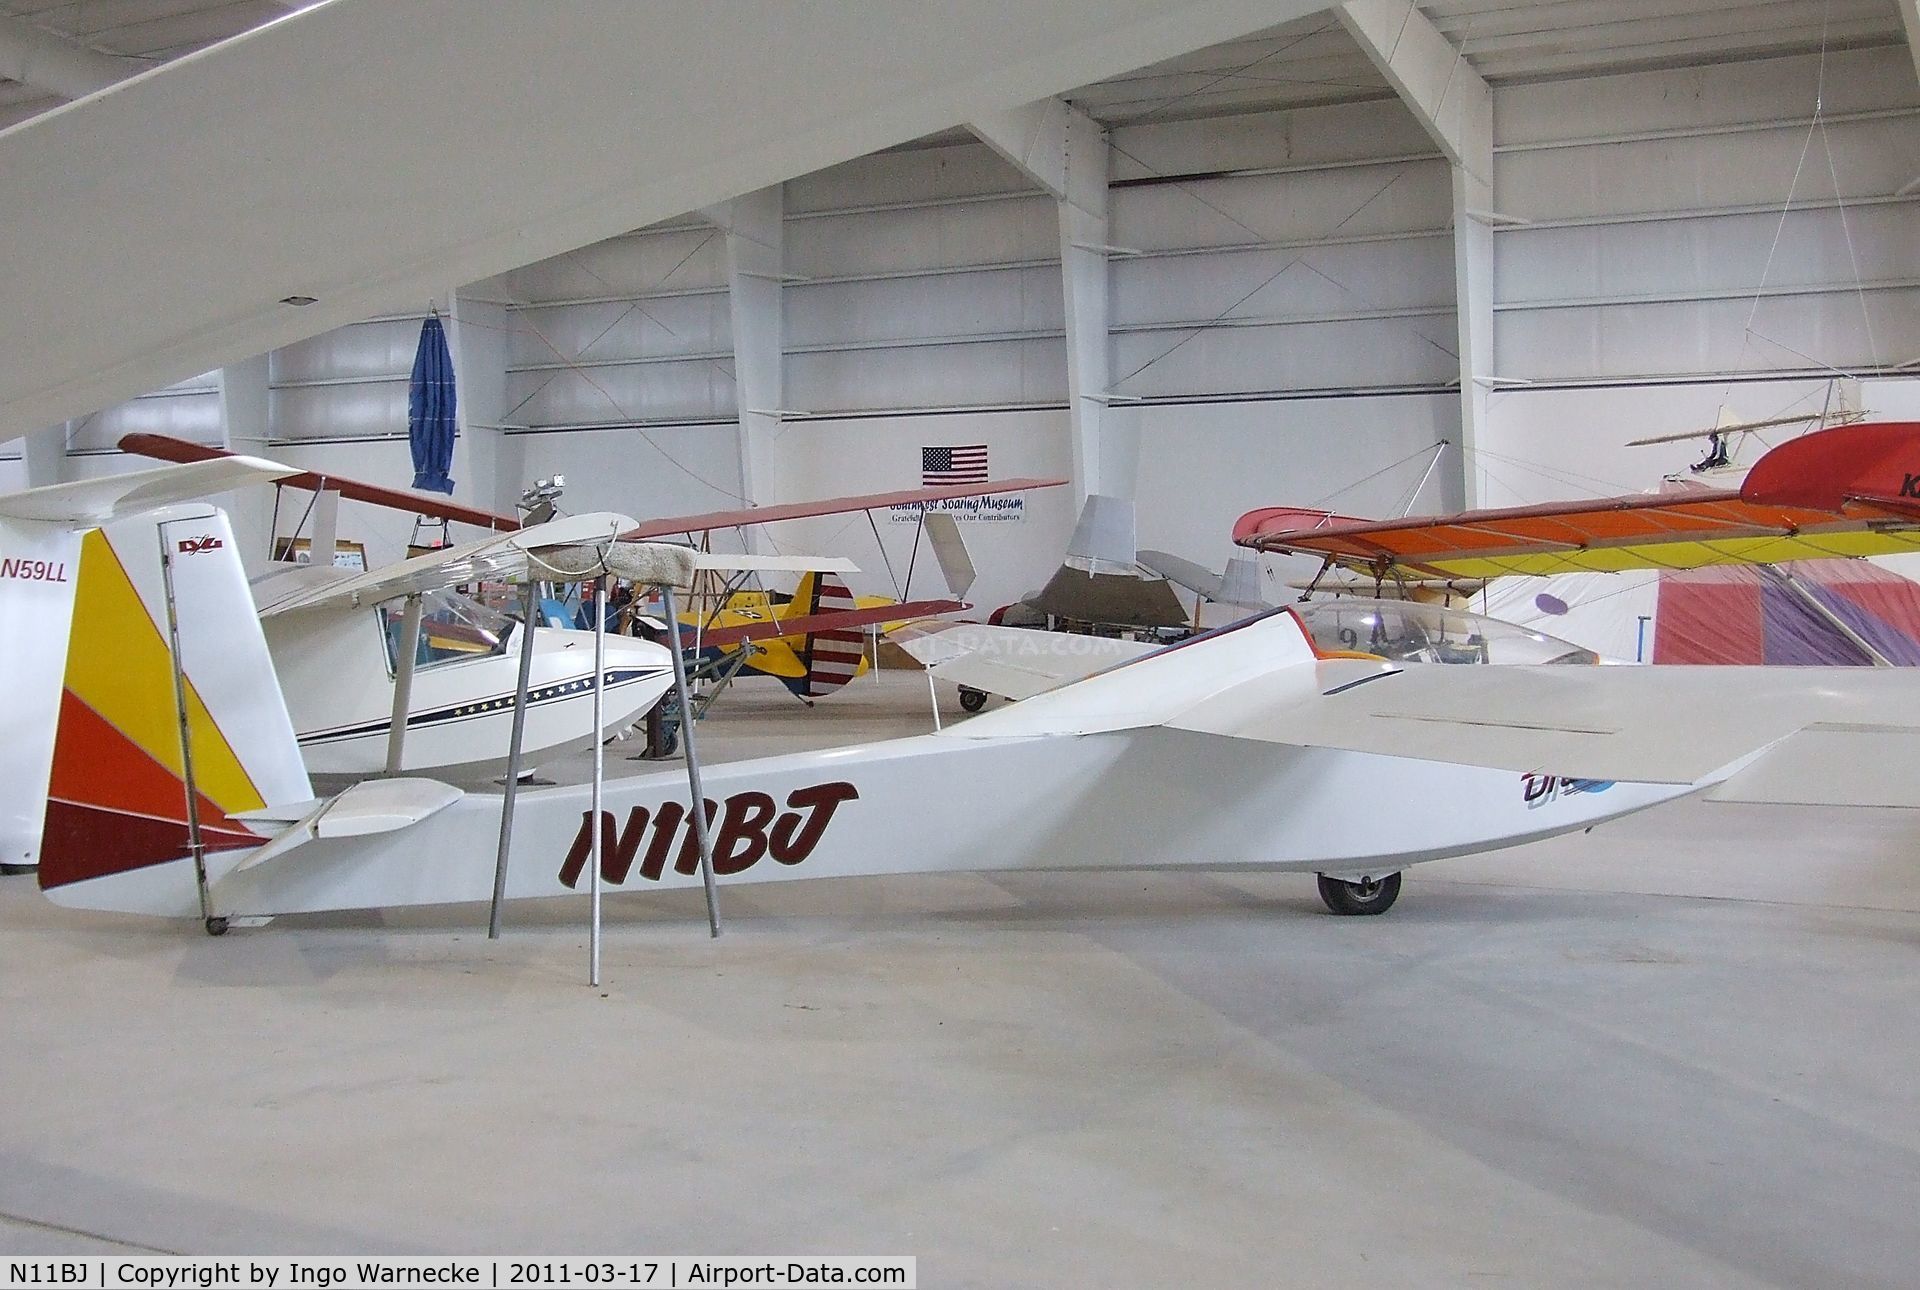 N11BJ, 1971 Maupin-barnhart BJ-1B C/N 2, Thor (Maupin-Barnhard) BJ-1B Duster at the Southwest Soaring Museum, Moriarty NM